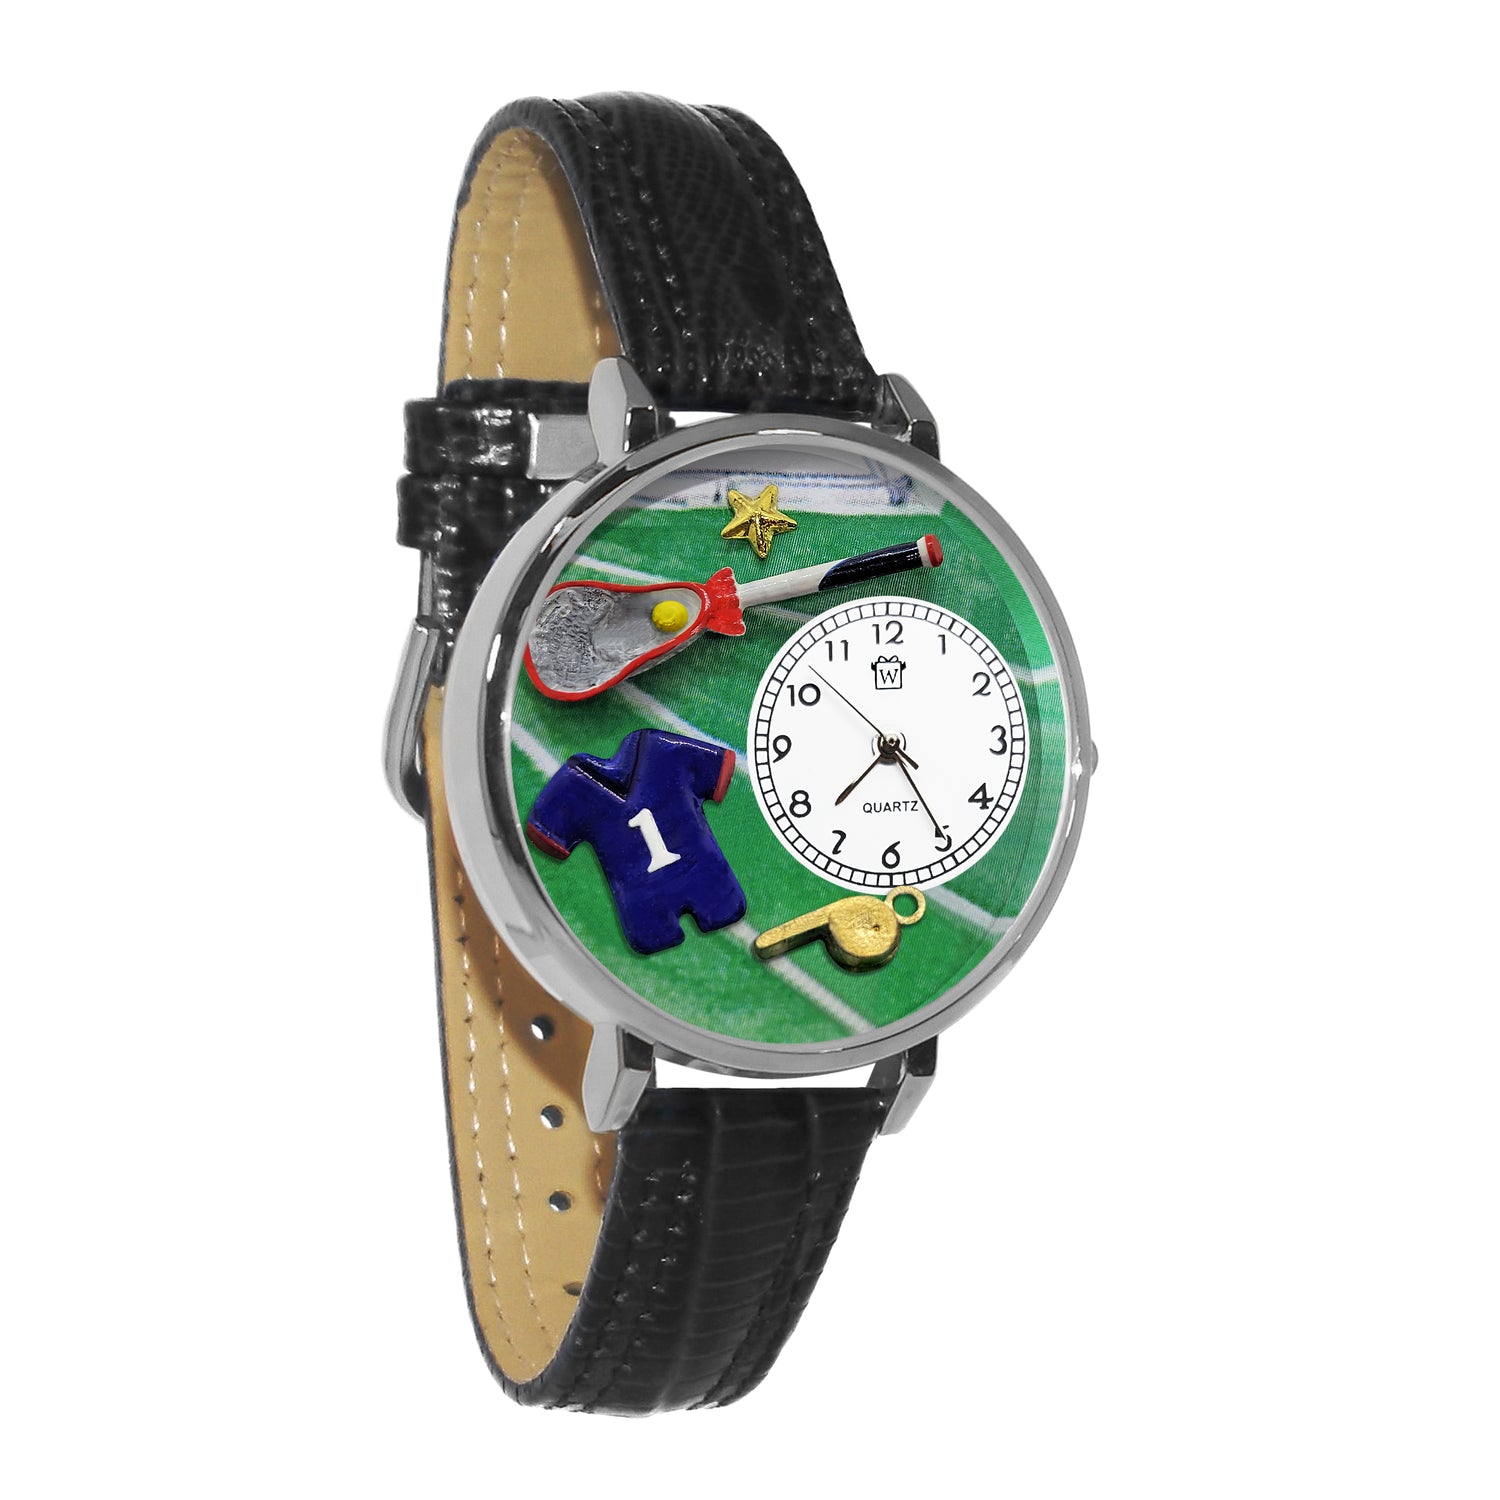 Whimsical Gifts | Lacrosse 3D Watch Large Style | Handmade in USA | Hobbies & Special Interests | Sports | Novelty Unique Fun Miniatures Gift | Silver Finish Shorts Black Leather Watch Band